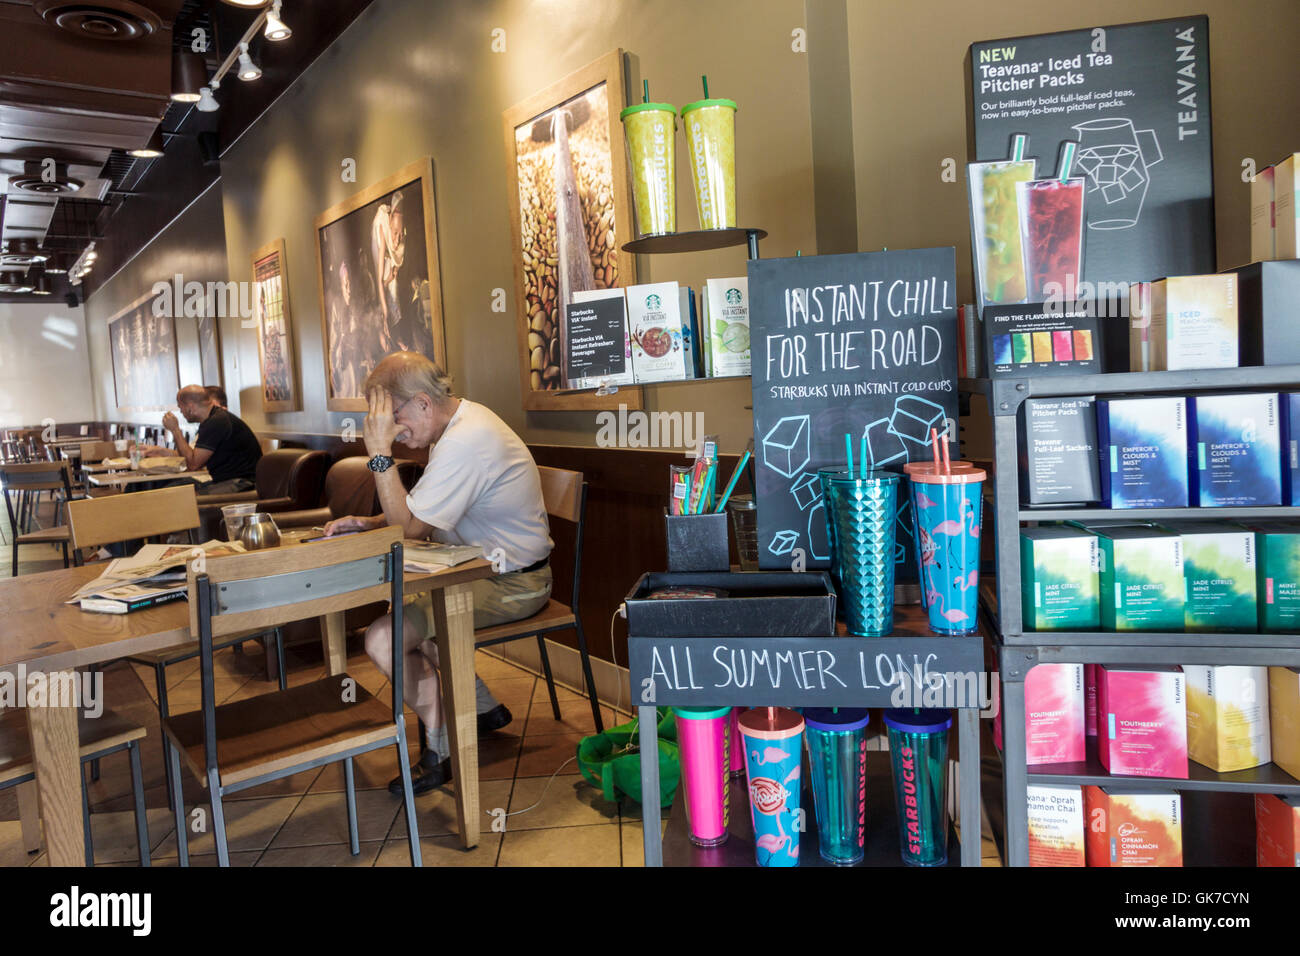 Miami Florida,Westchester,Starbucks Coffee,company,coffeehouse,cafe,chain,table,chair,adult,adults,man men male,customer,products,brand,promotion,Teav Stock Photo